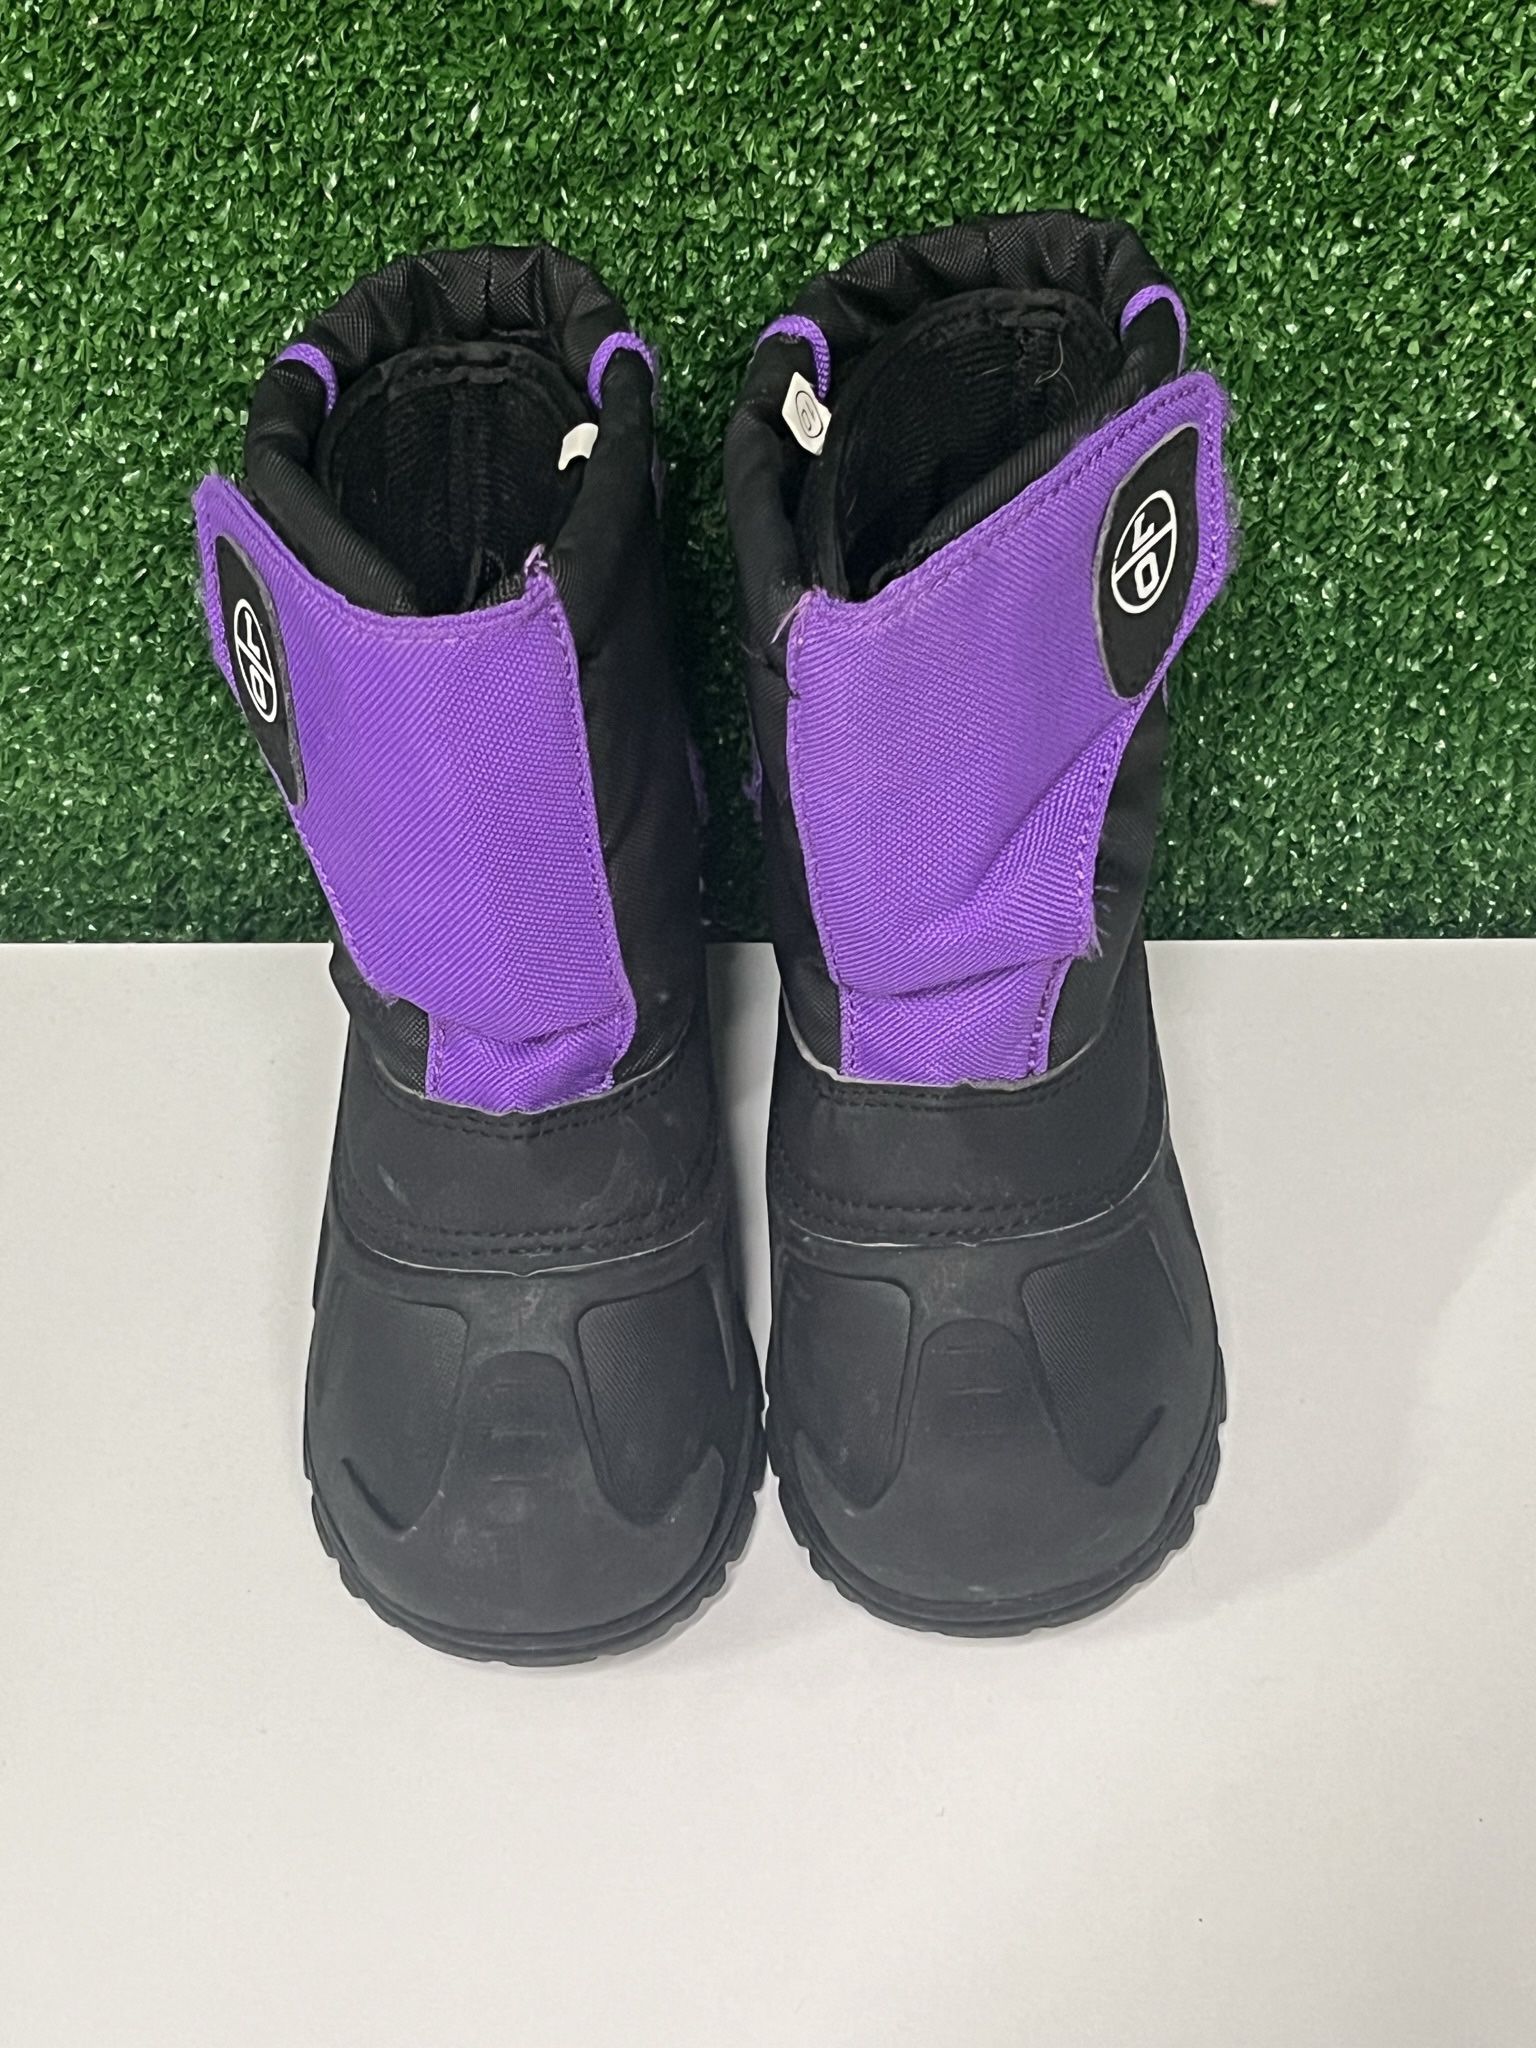 L/O Unbranded Purple And Black Snow Boots Size 10